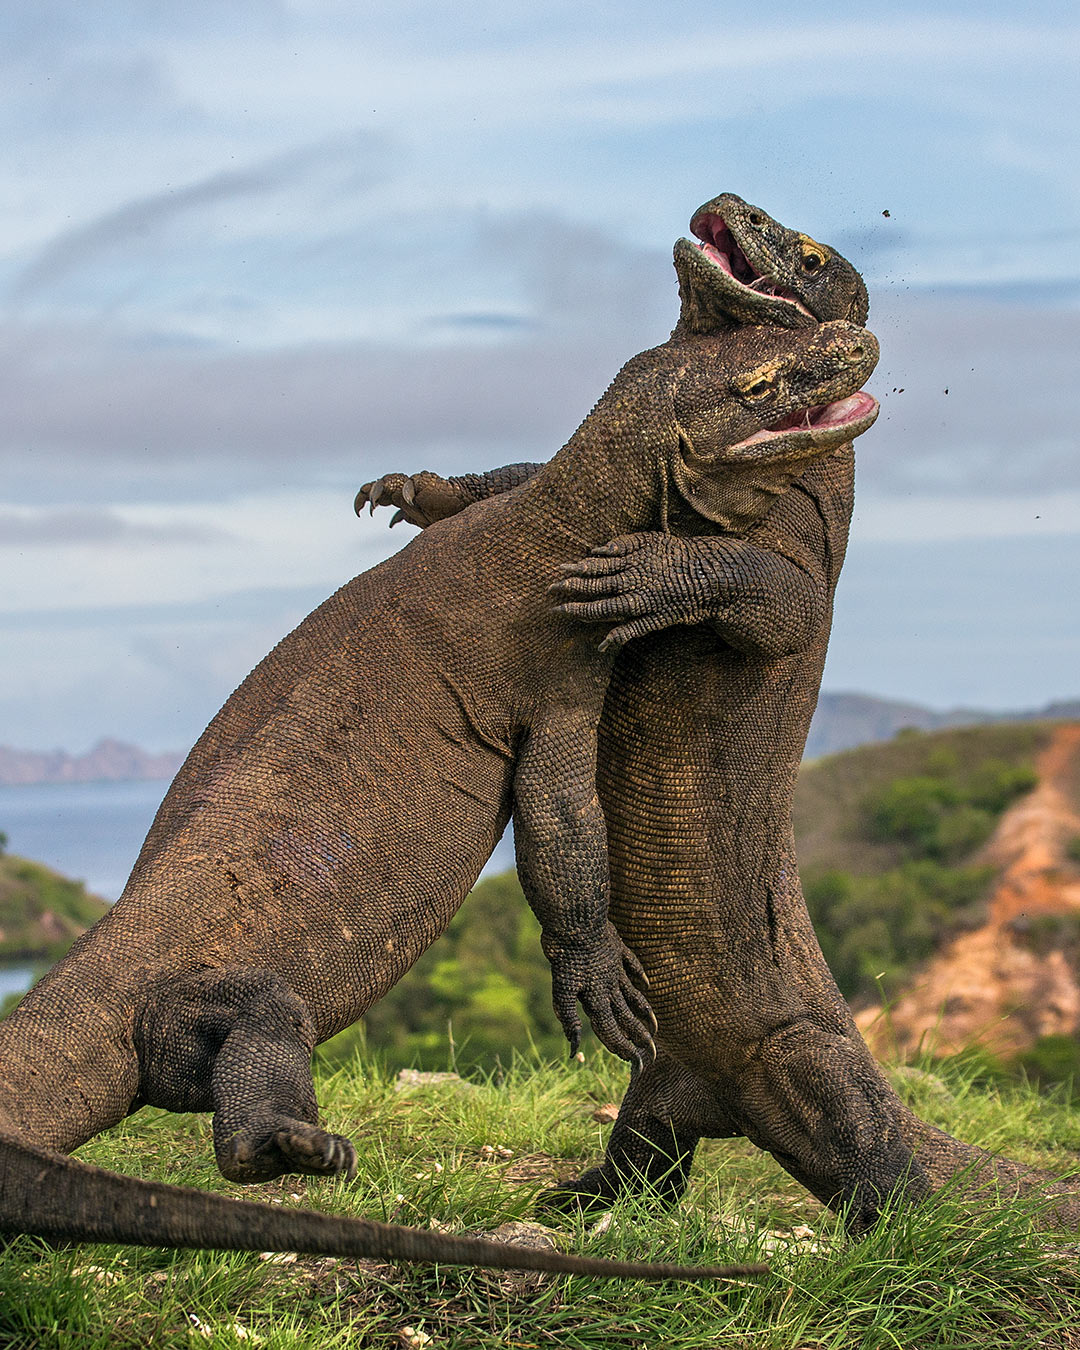 How To Survive a Komodo Dragon Attack | What If Show